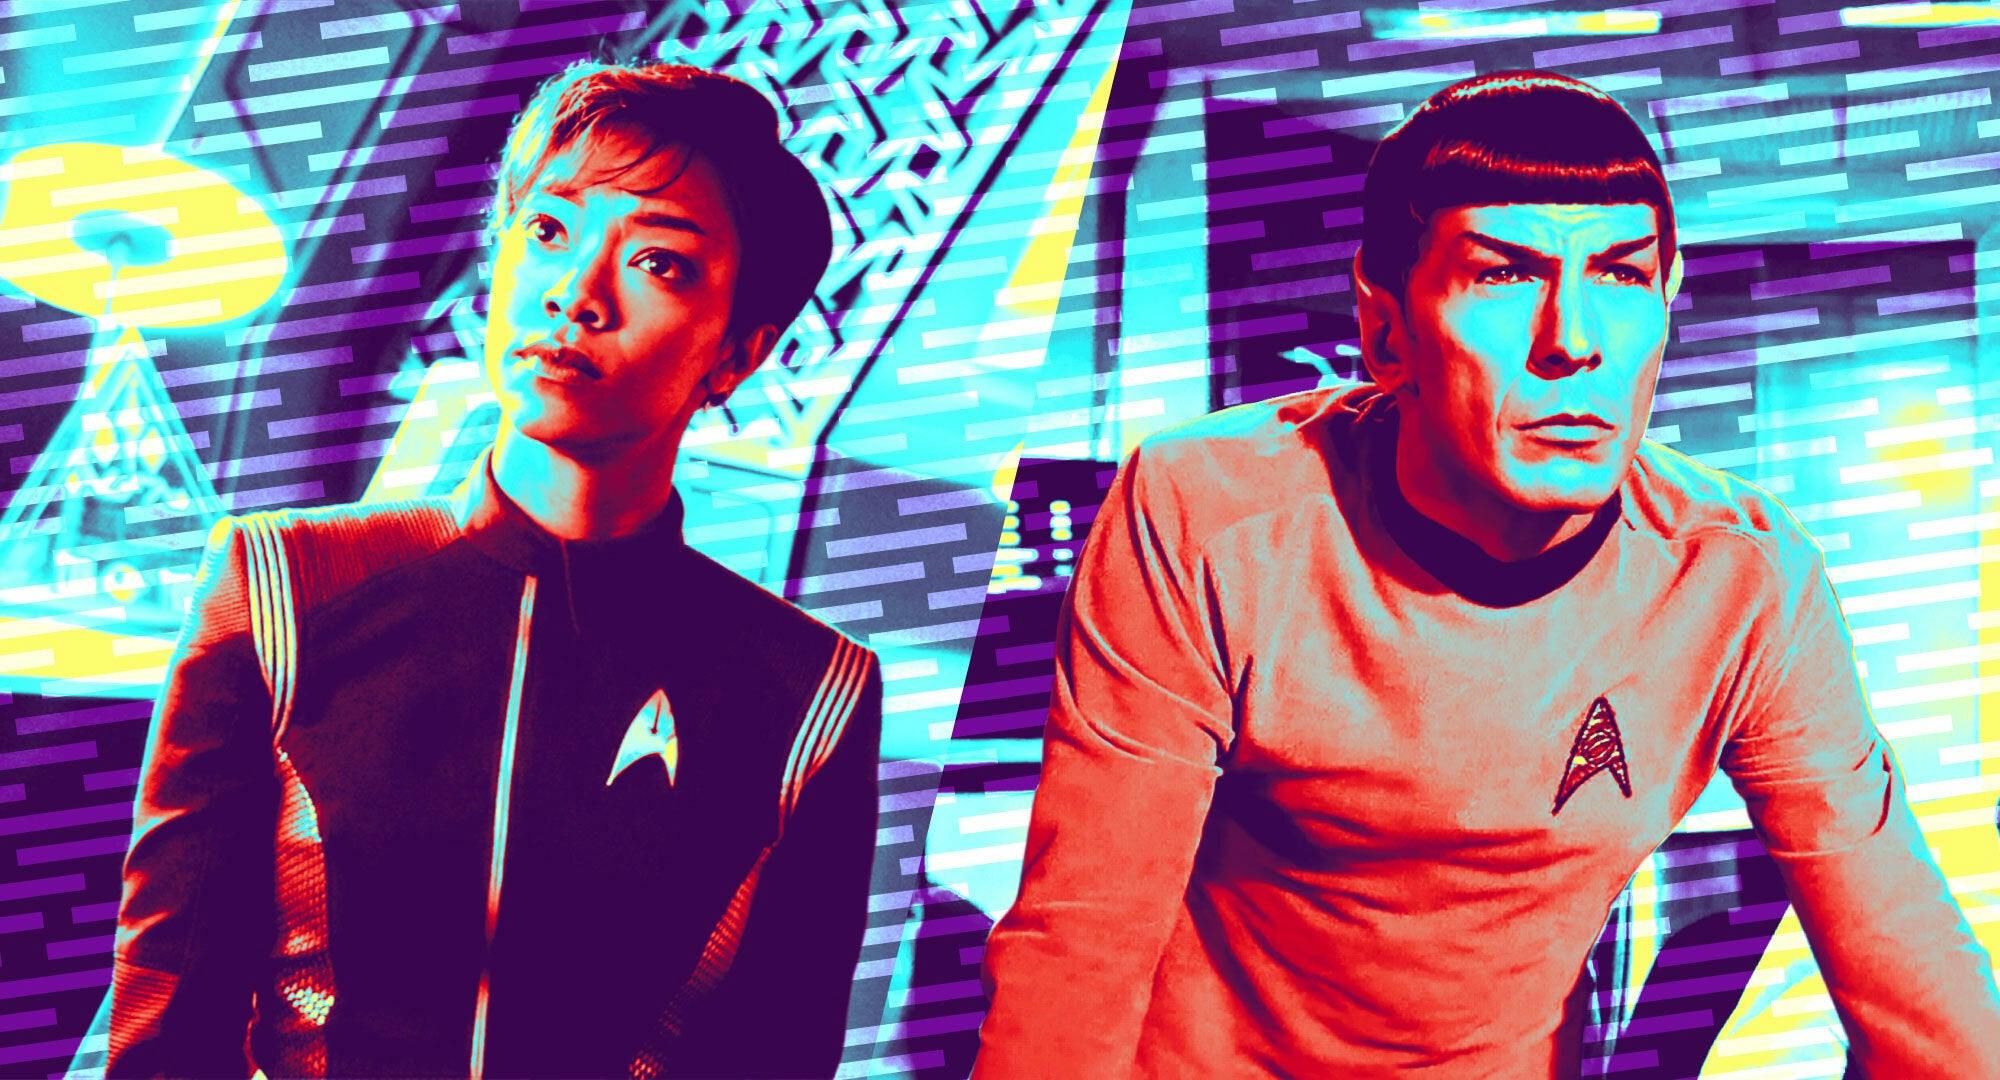 Illustrated banner featuring Star Trek: Discovery's Michael Burnham and The Original Series' Spock